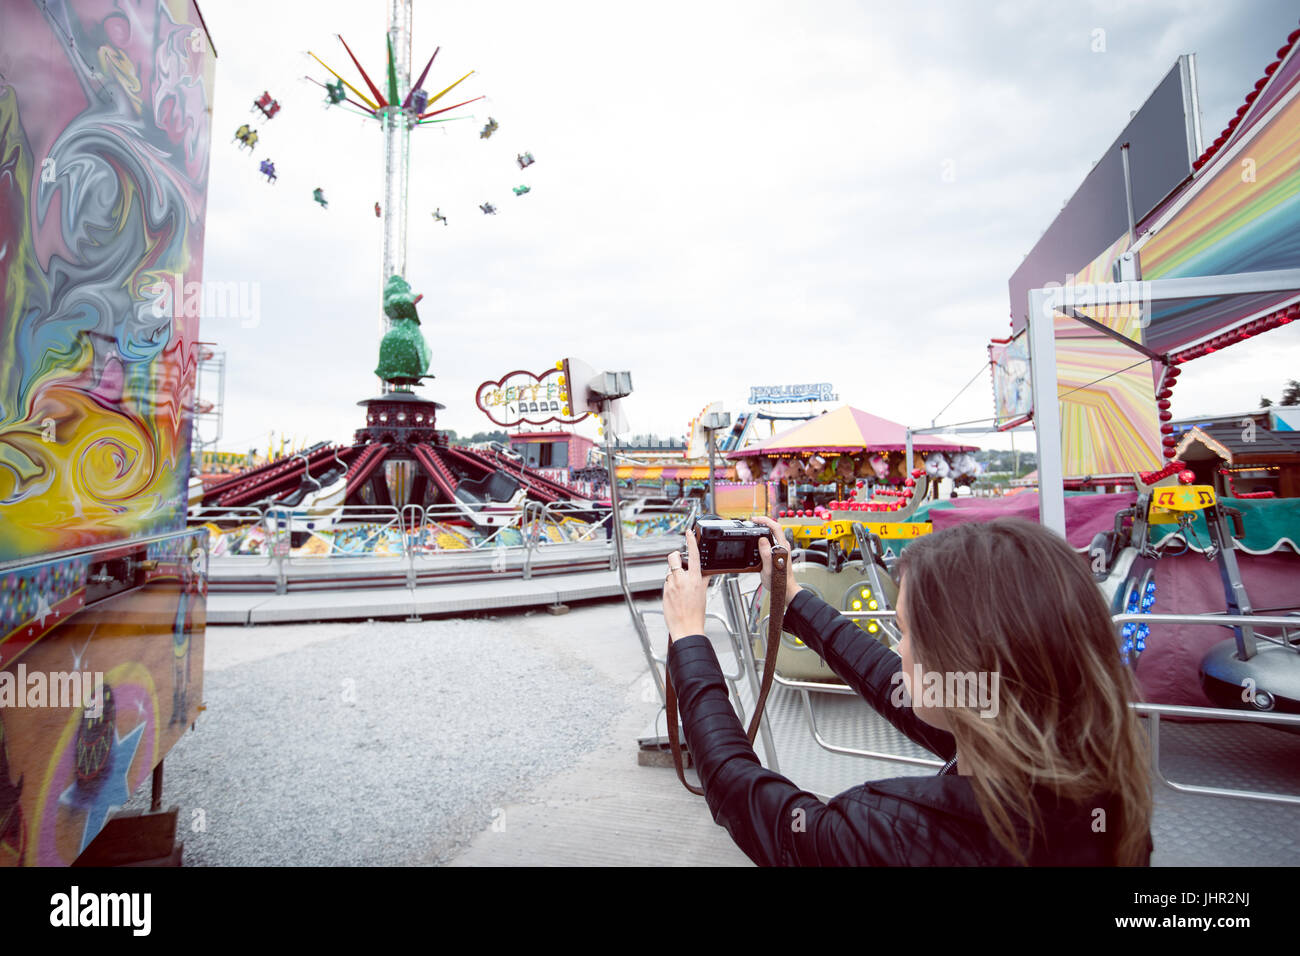 Woman clicking picture with digital camera in amusement park Stock Photo